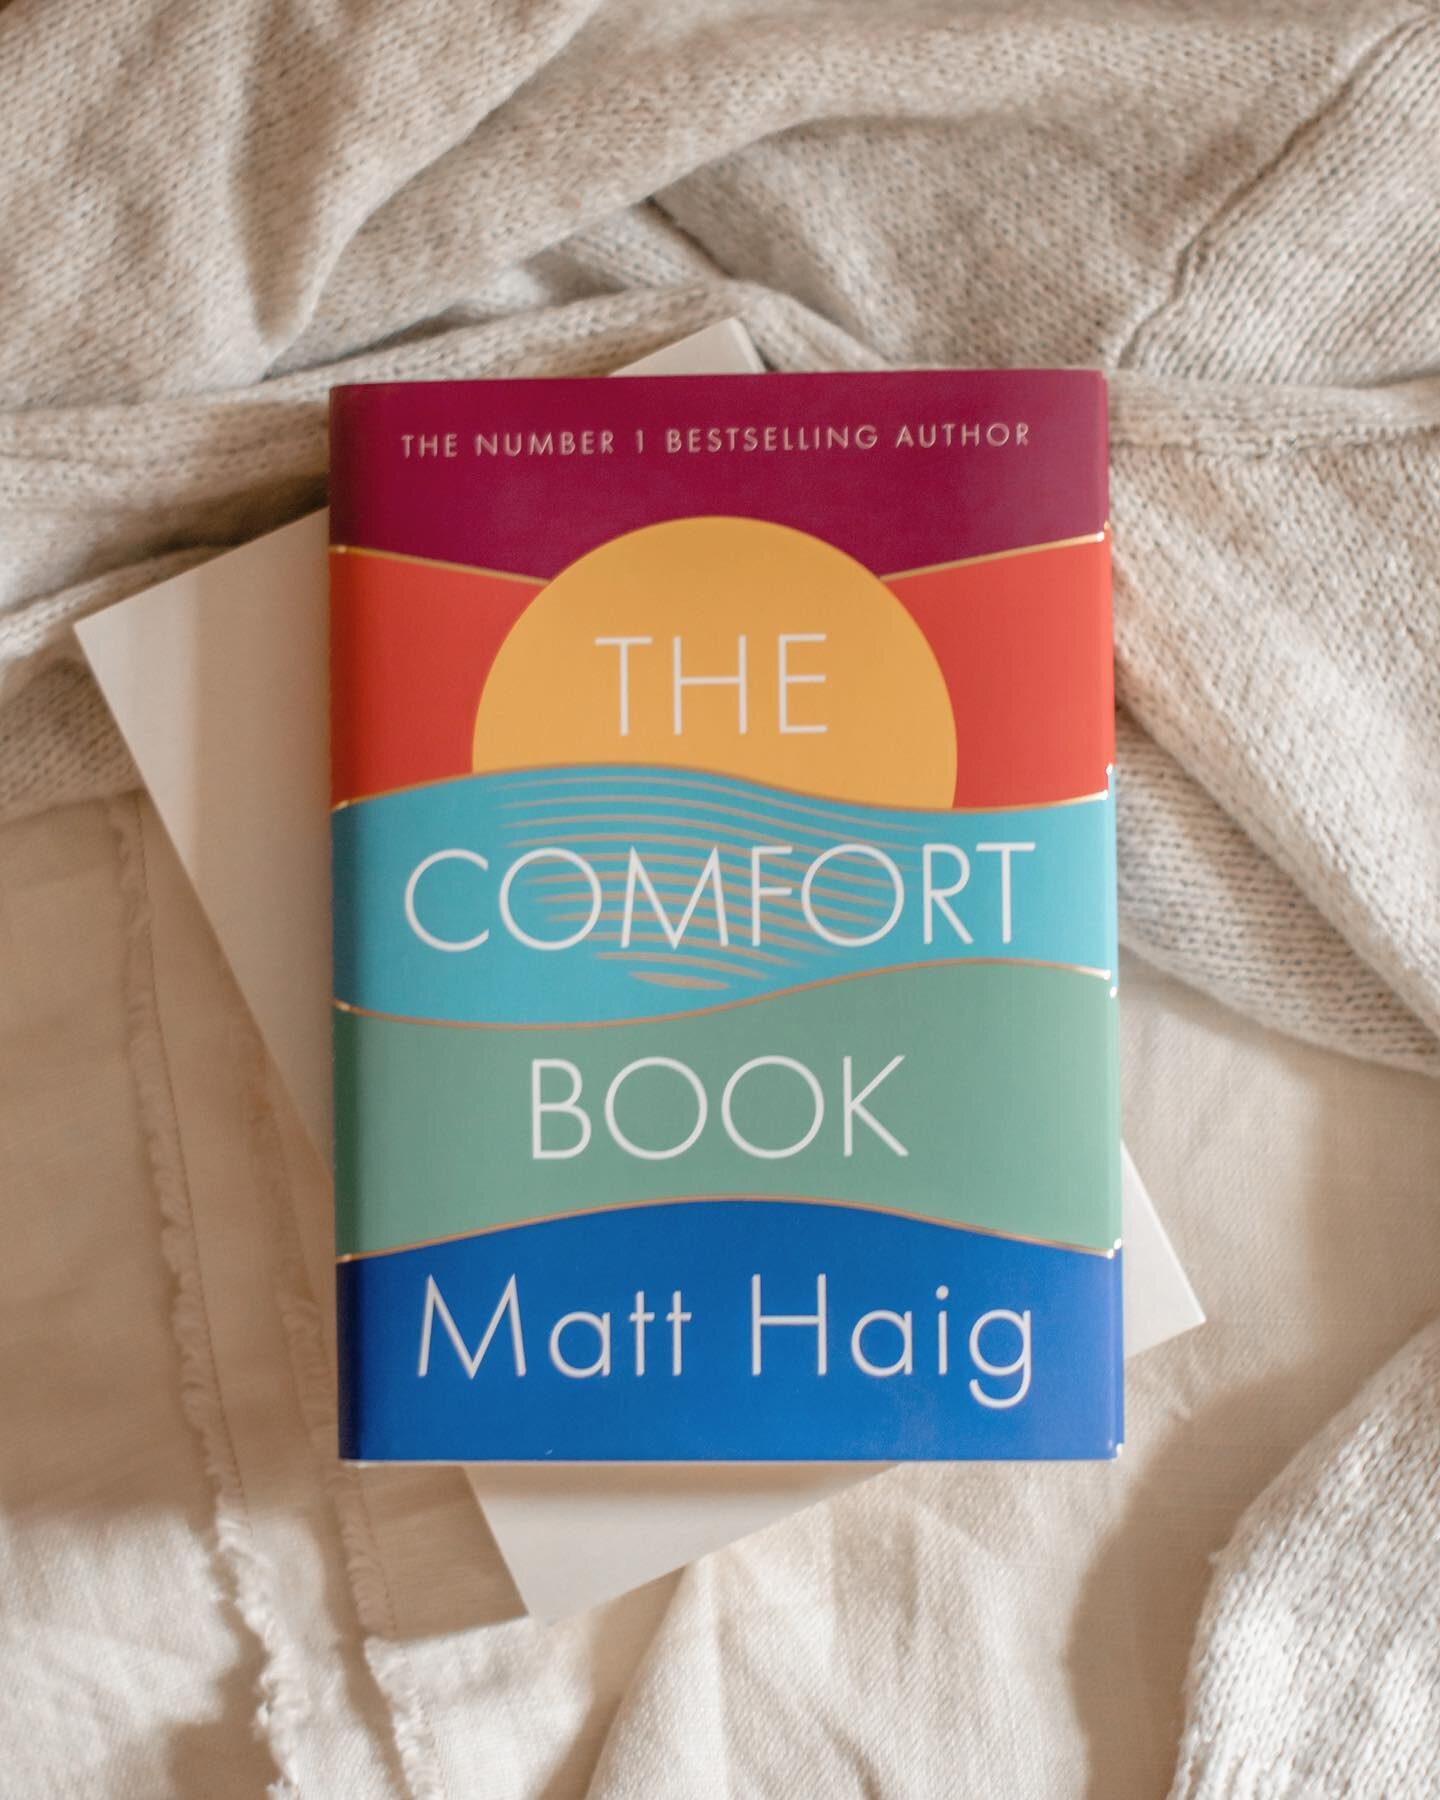 Ad - pr product | The Comfort Book by @mattzhaig

This book was kindly sent to me by @canongatebooks, and oh my goodness am I happy they did.

As you all probably know by now, I am a huge fan of Matt Haig&rsquo;s writing. Whilst in his fiction, he bu